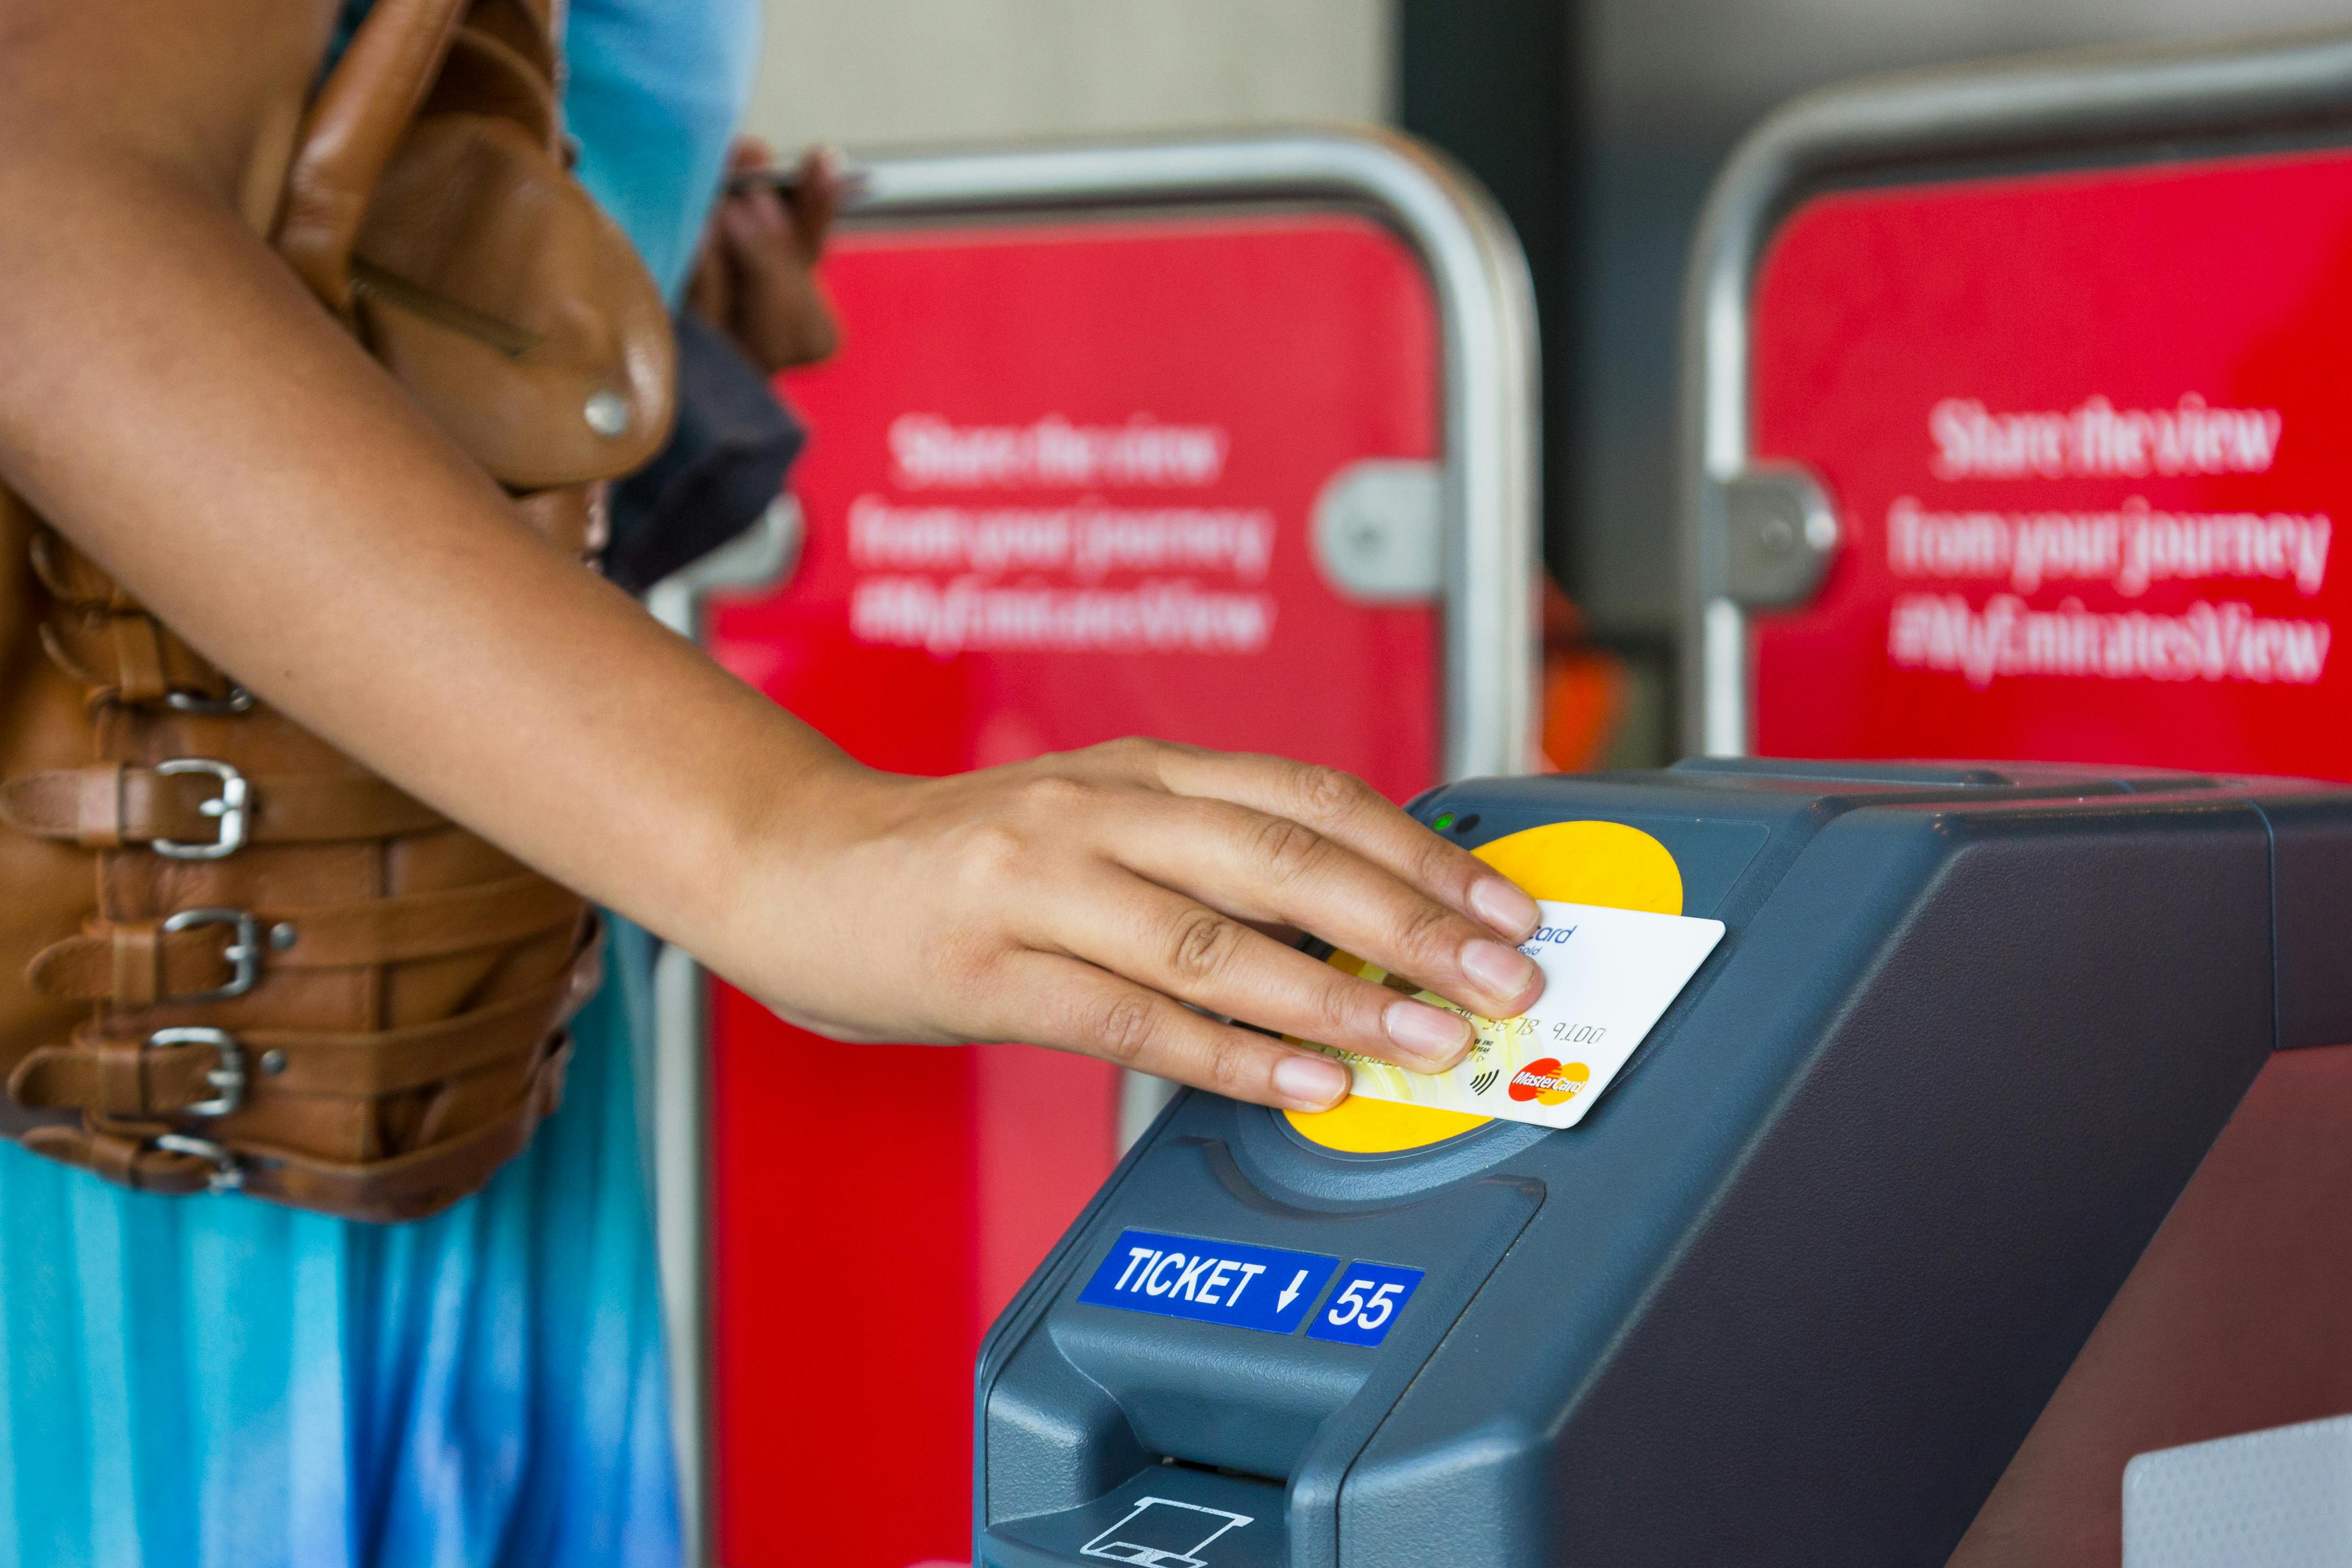 tfl travel costs contactless